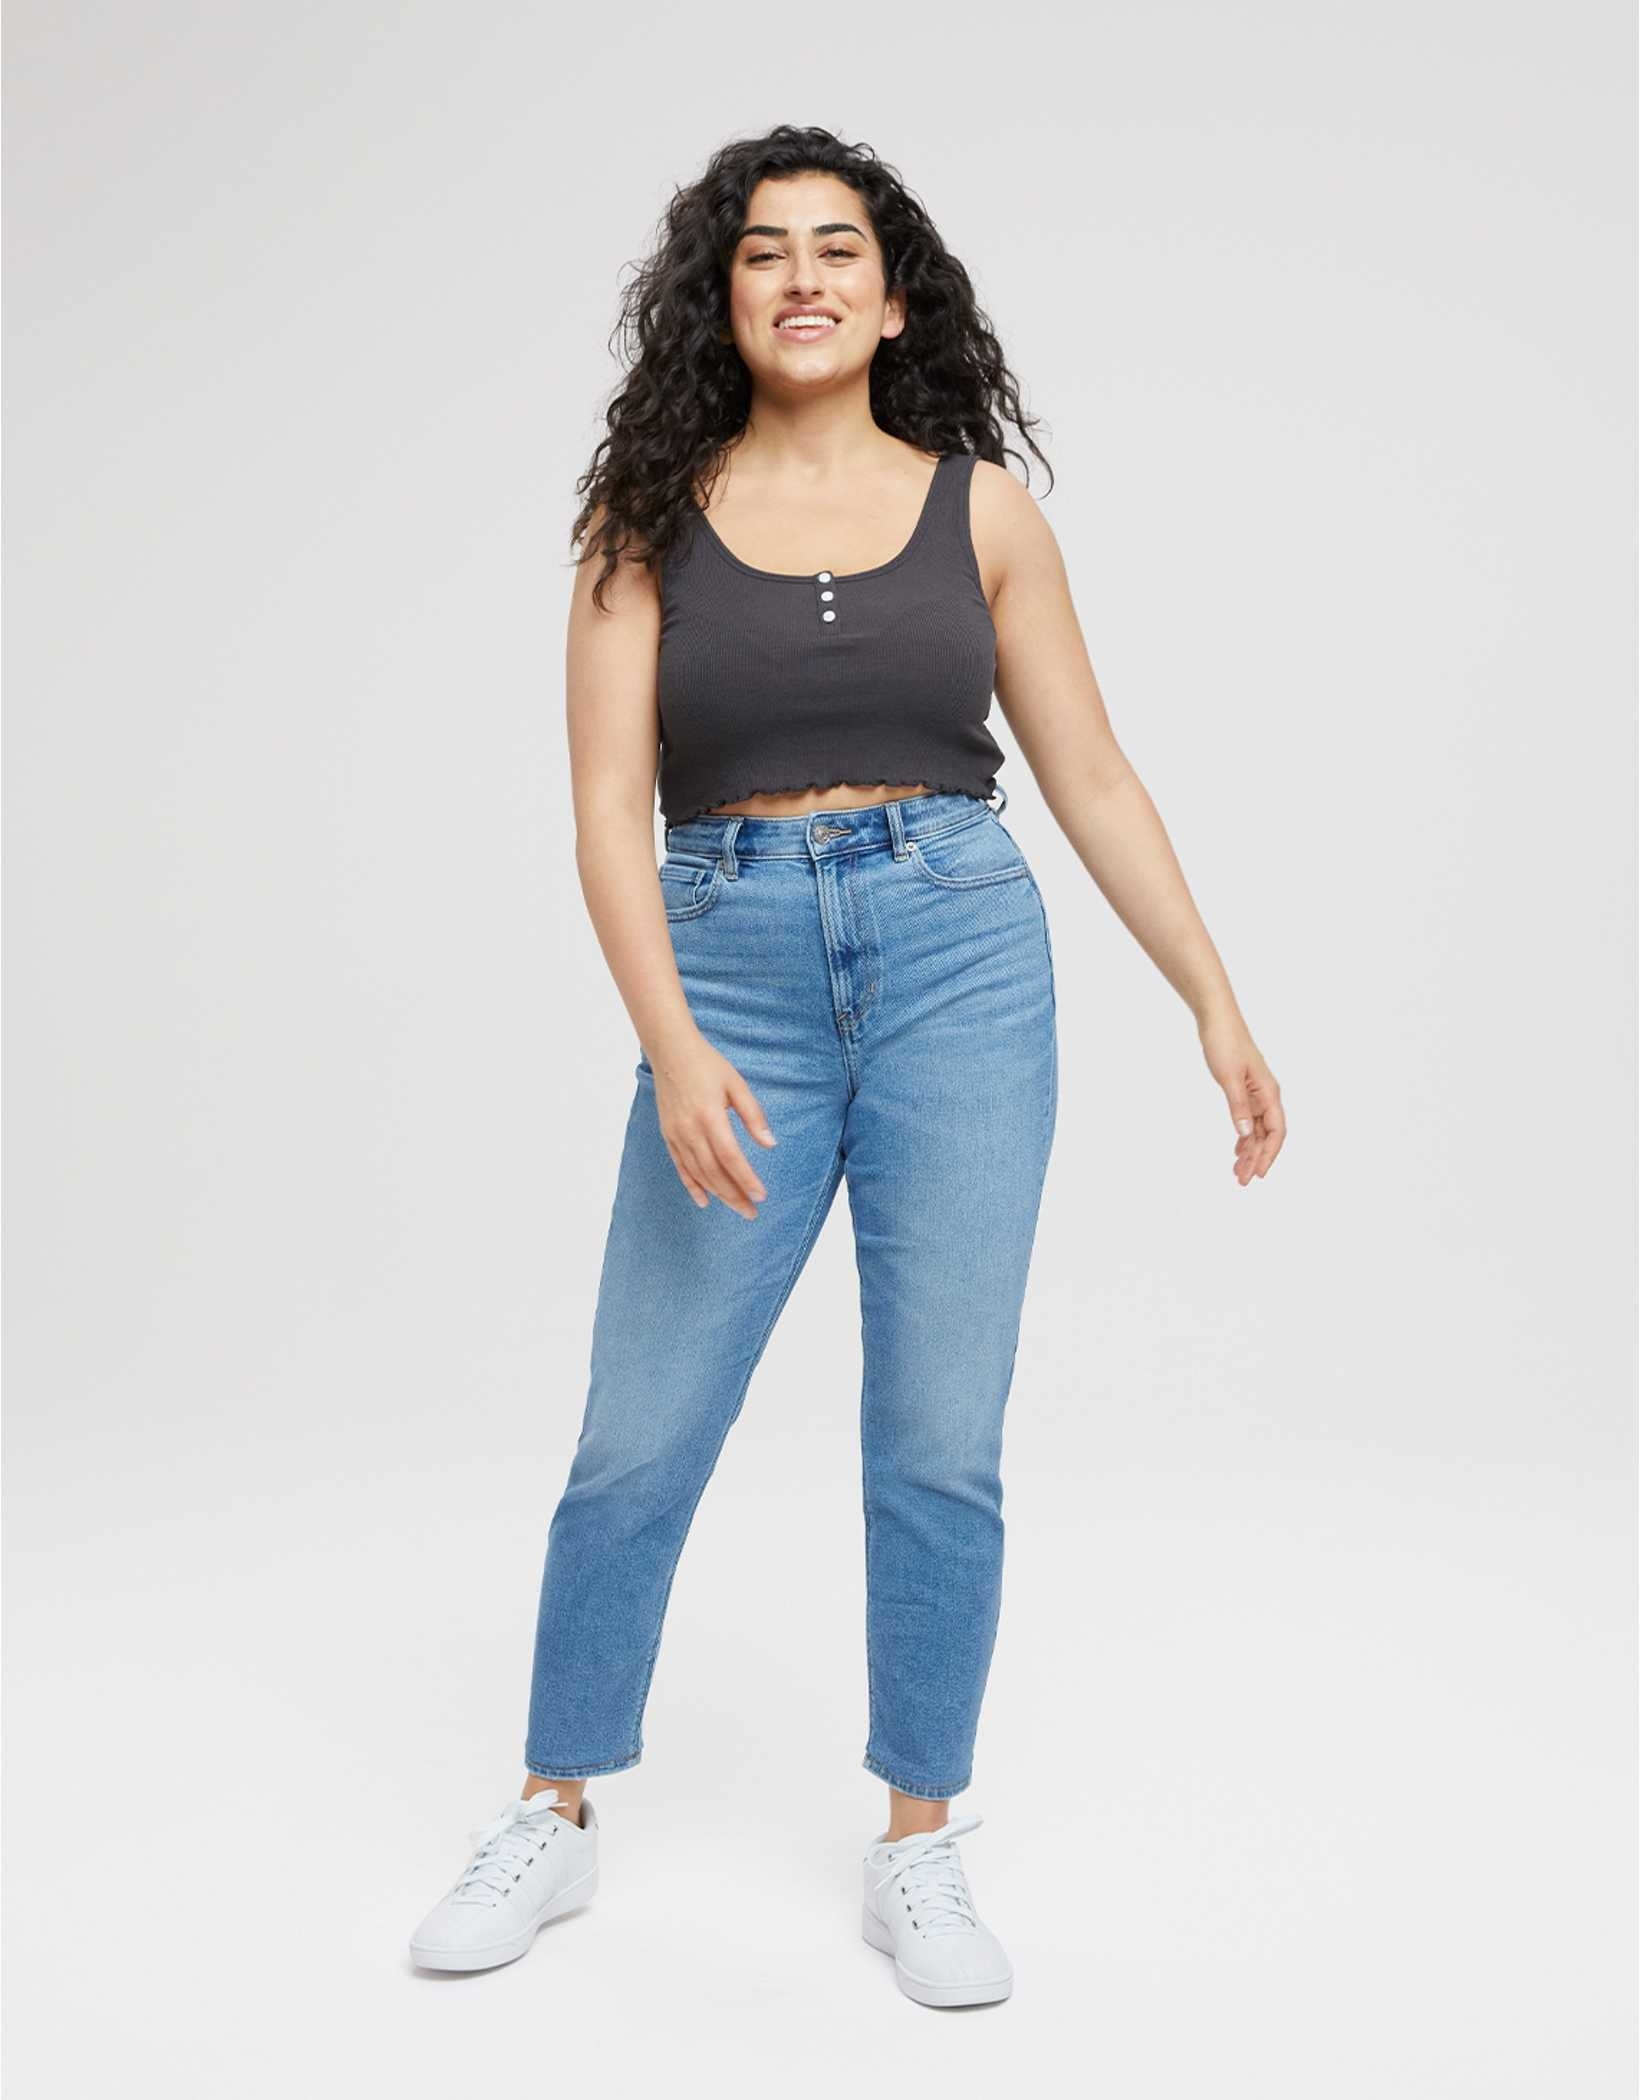 model wearing light wash jeans with tapered leg and a high waist